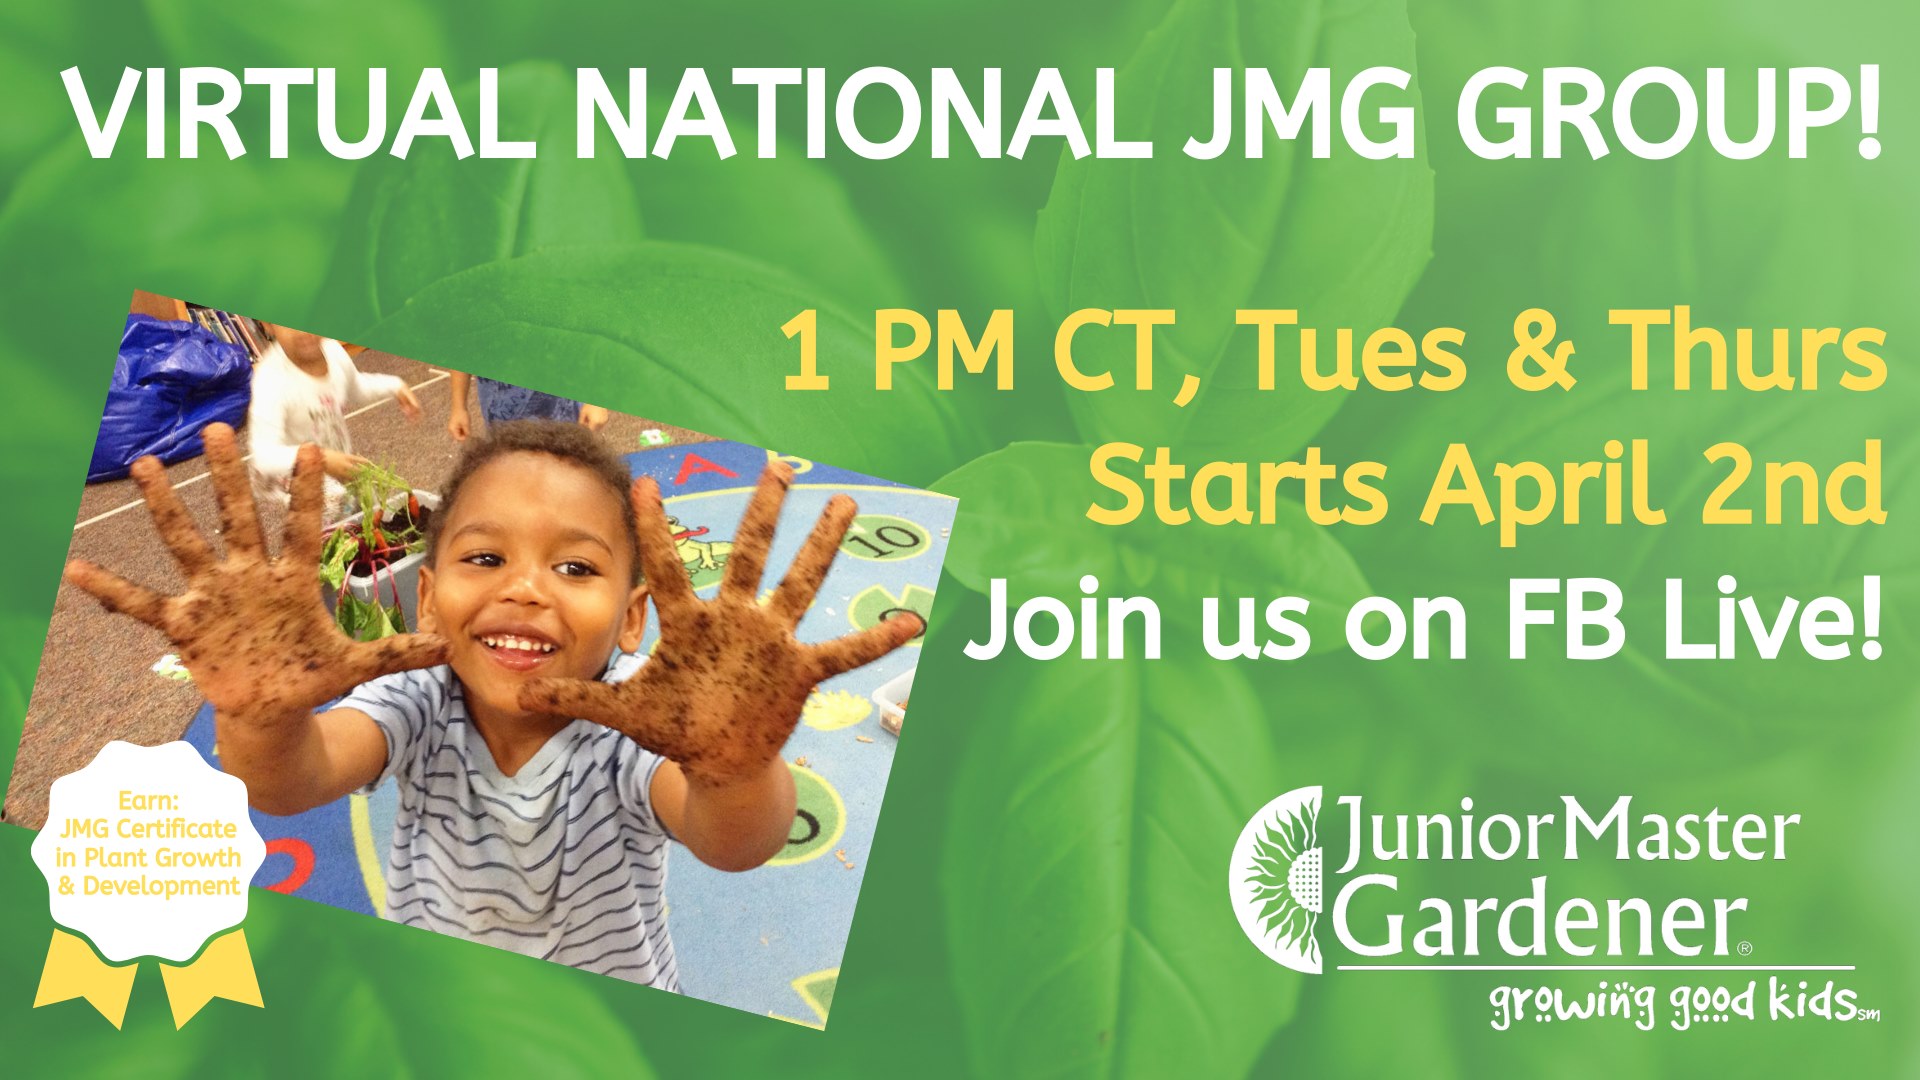 Flyer for Virtual National JMG Group! Event begins at 1 pm CT, Tuesday & Thursday starting April 2nd. Join us on Facebook Live! Participants can earn: JMG Certificate in Plant Growth and Development. Event is sponsored by Junior Master gardener: growing good kids.